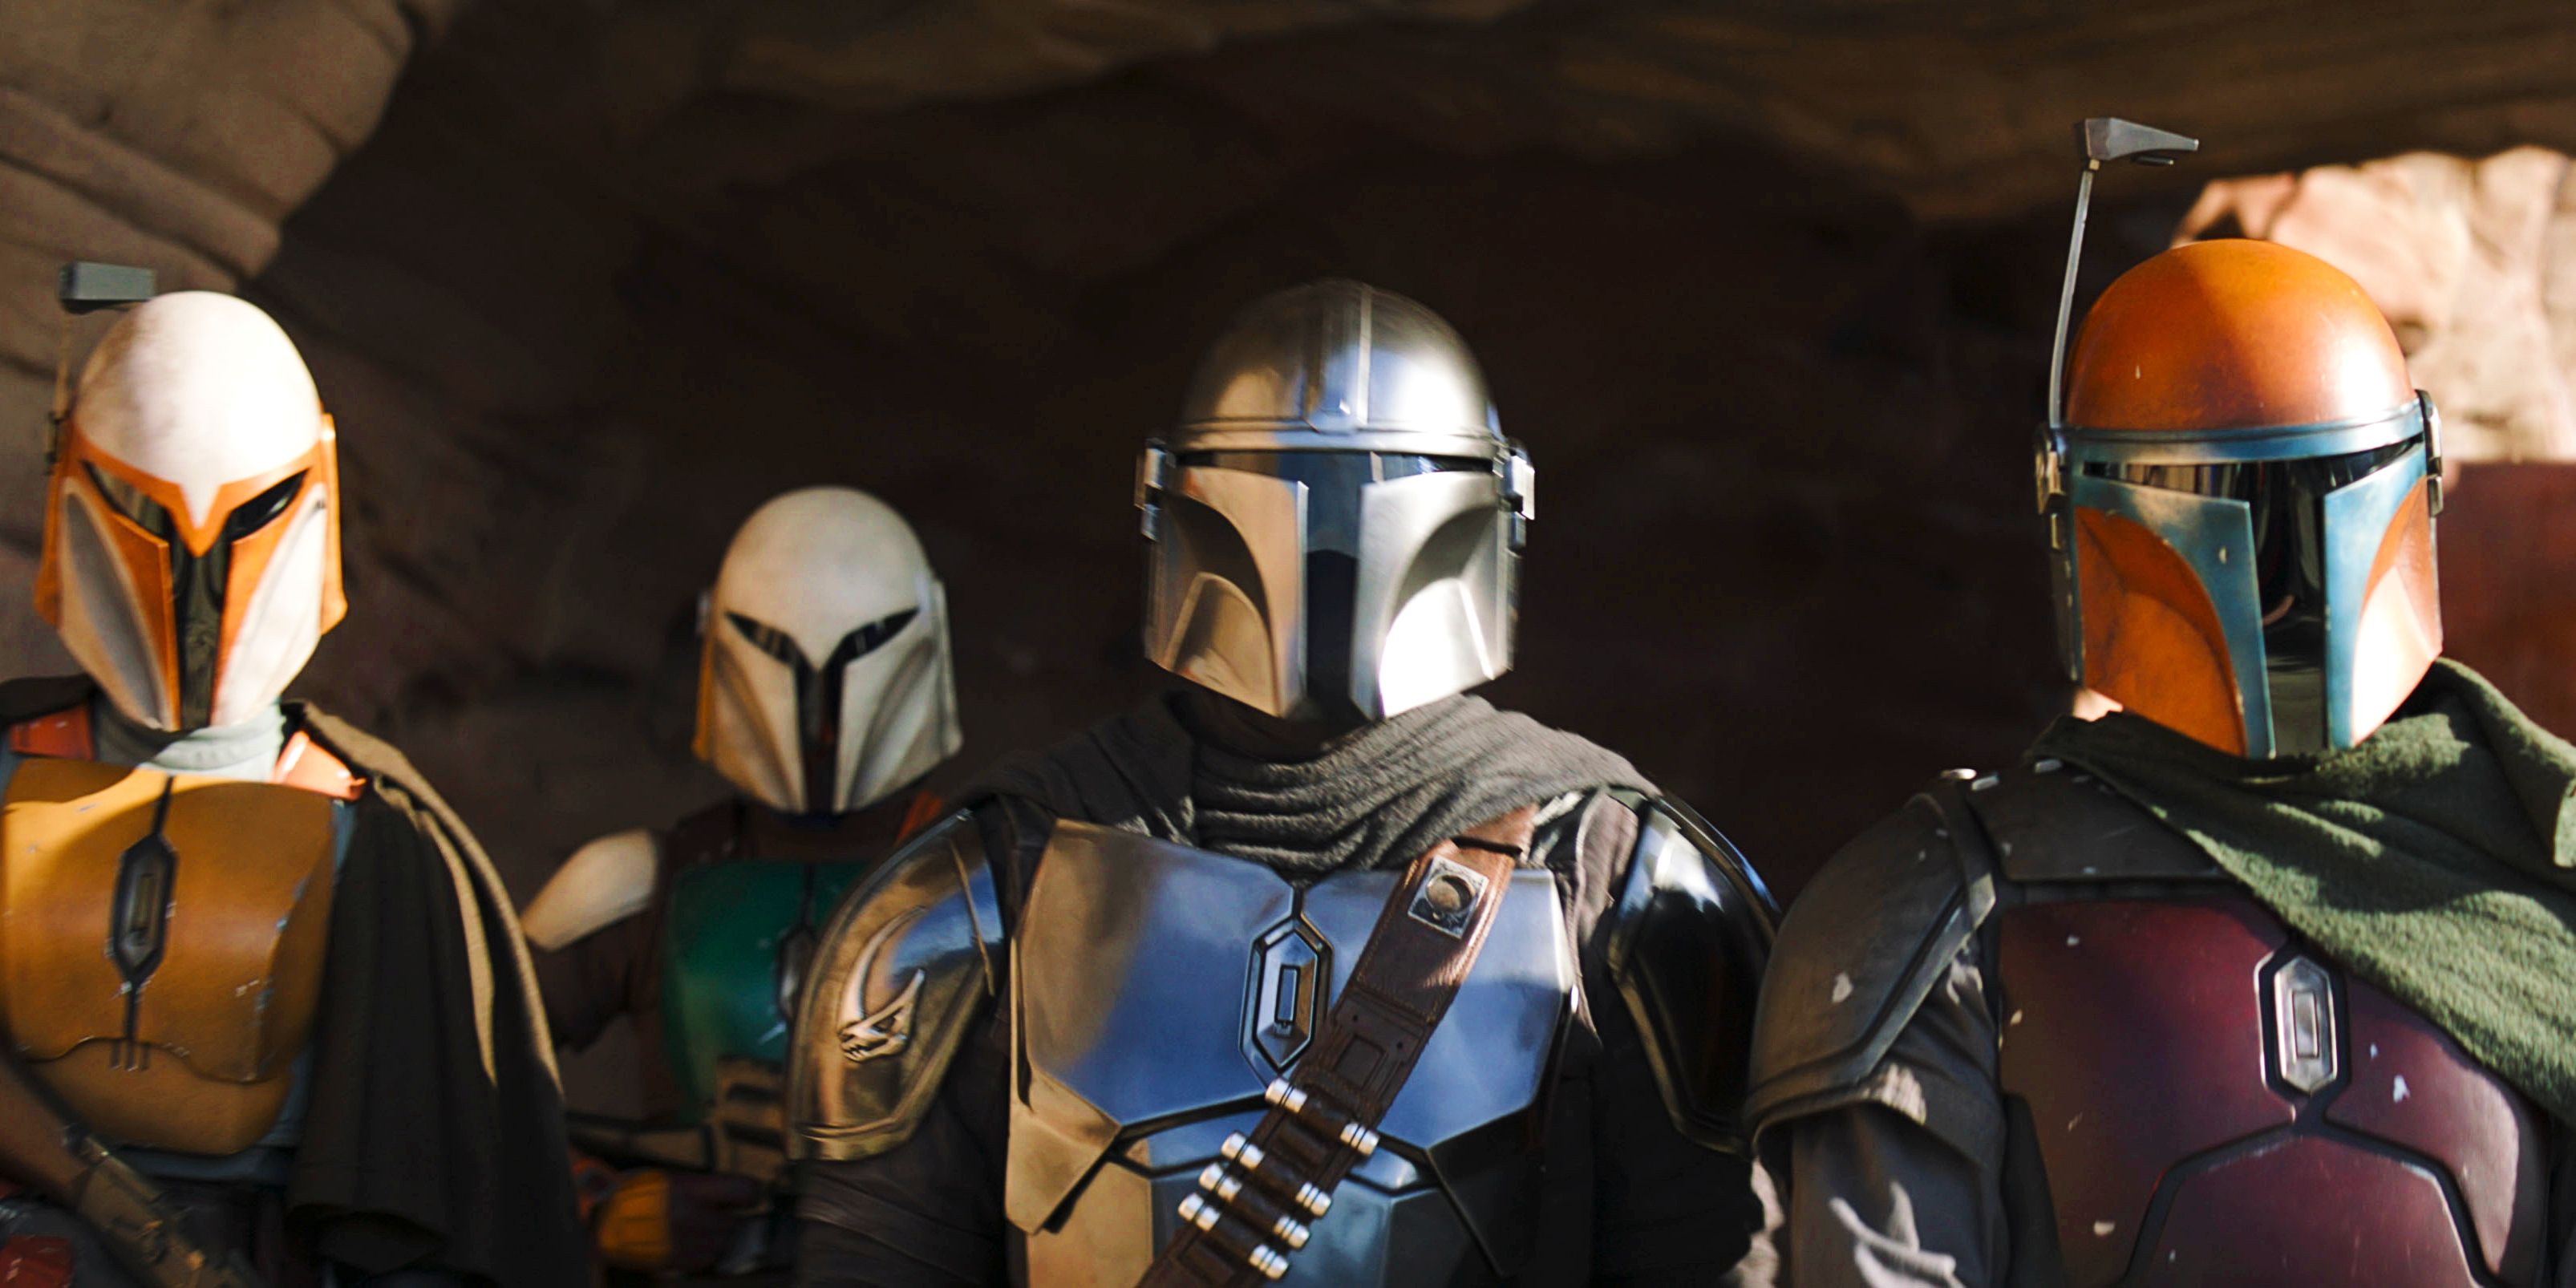 Din Djarin standing with three other Mandalorians